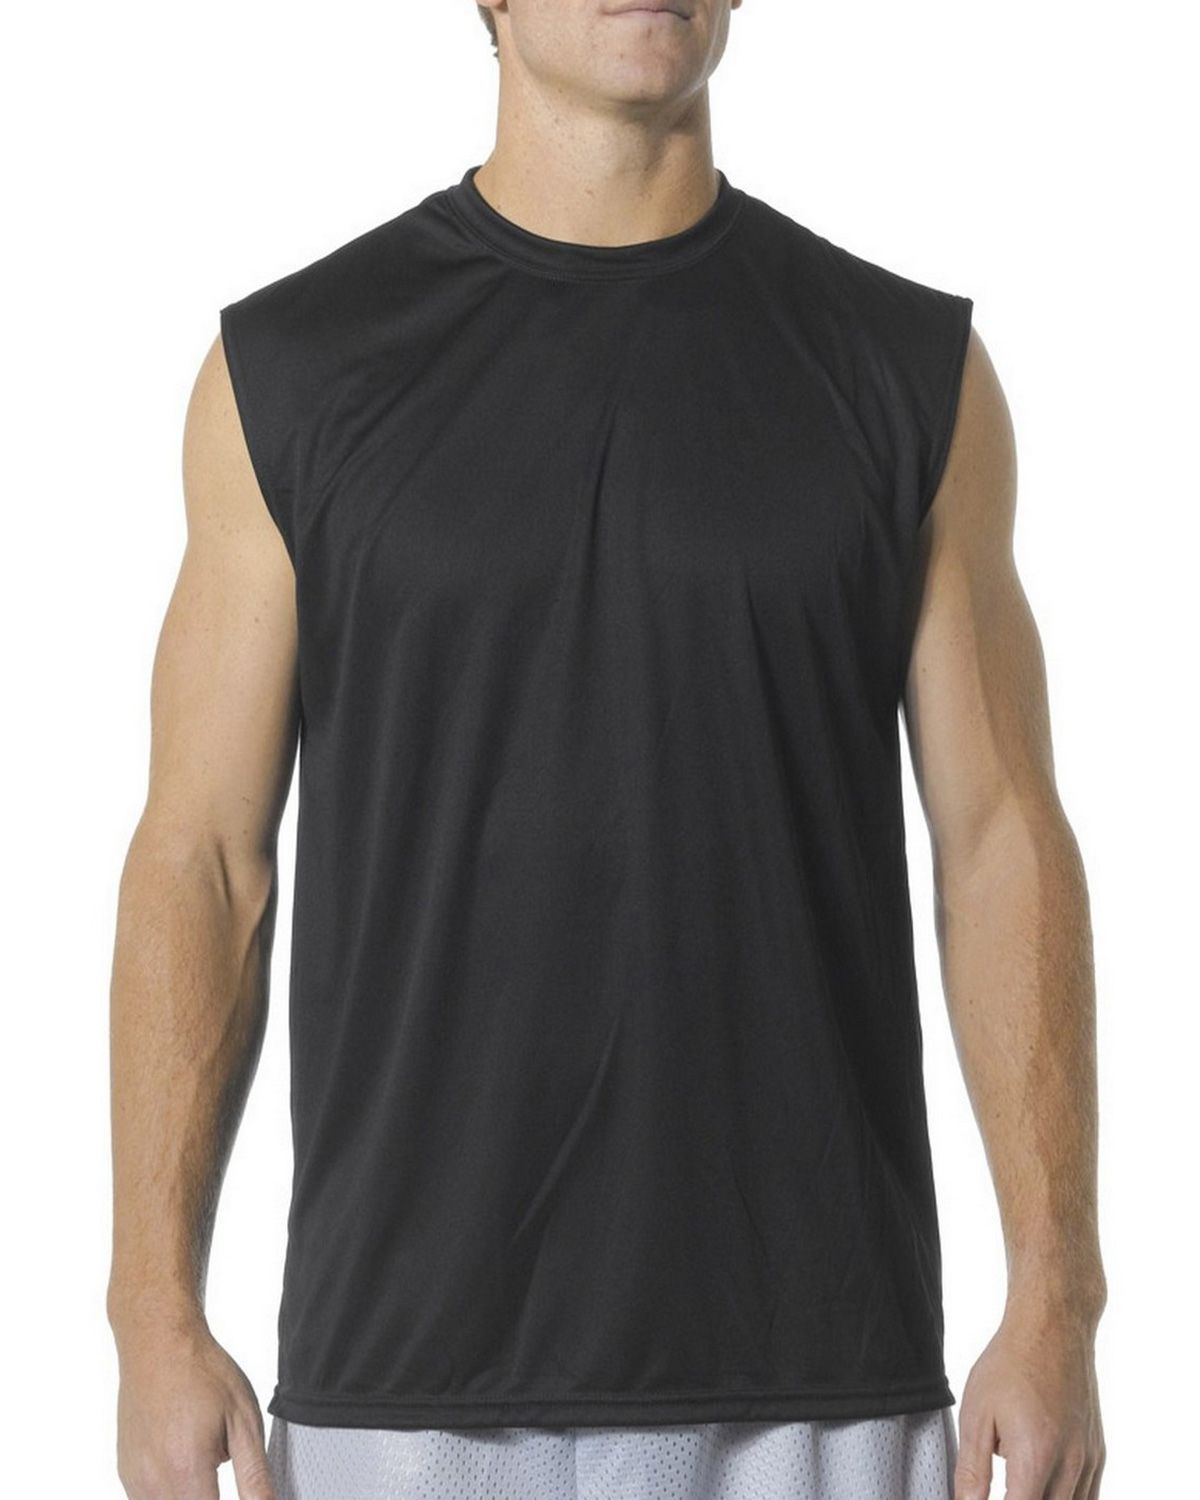 A4 N2295 Men's Cooling Performance Muscle Tee